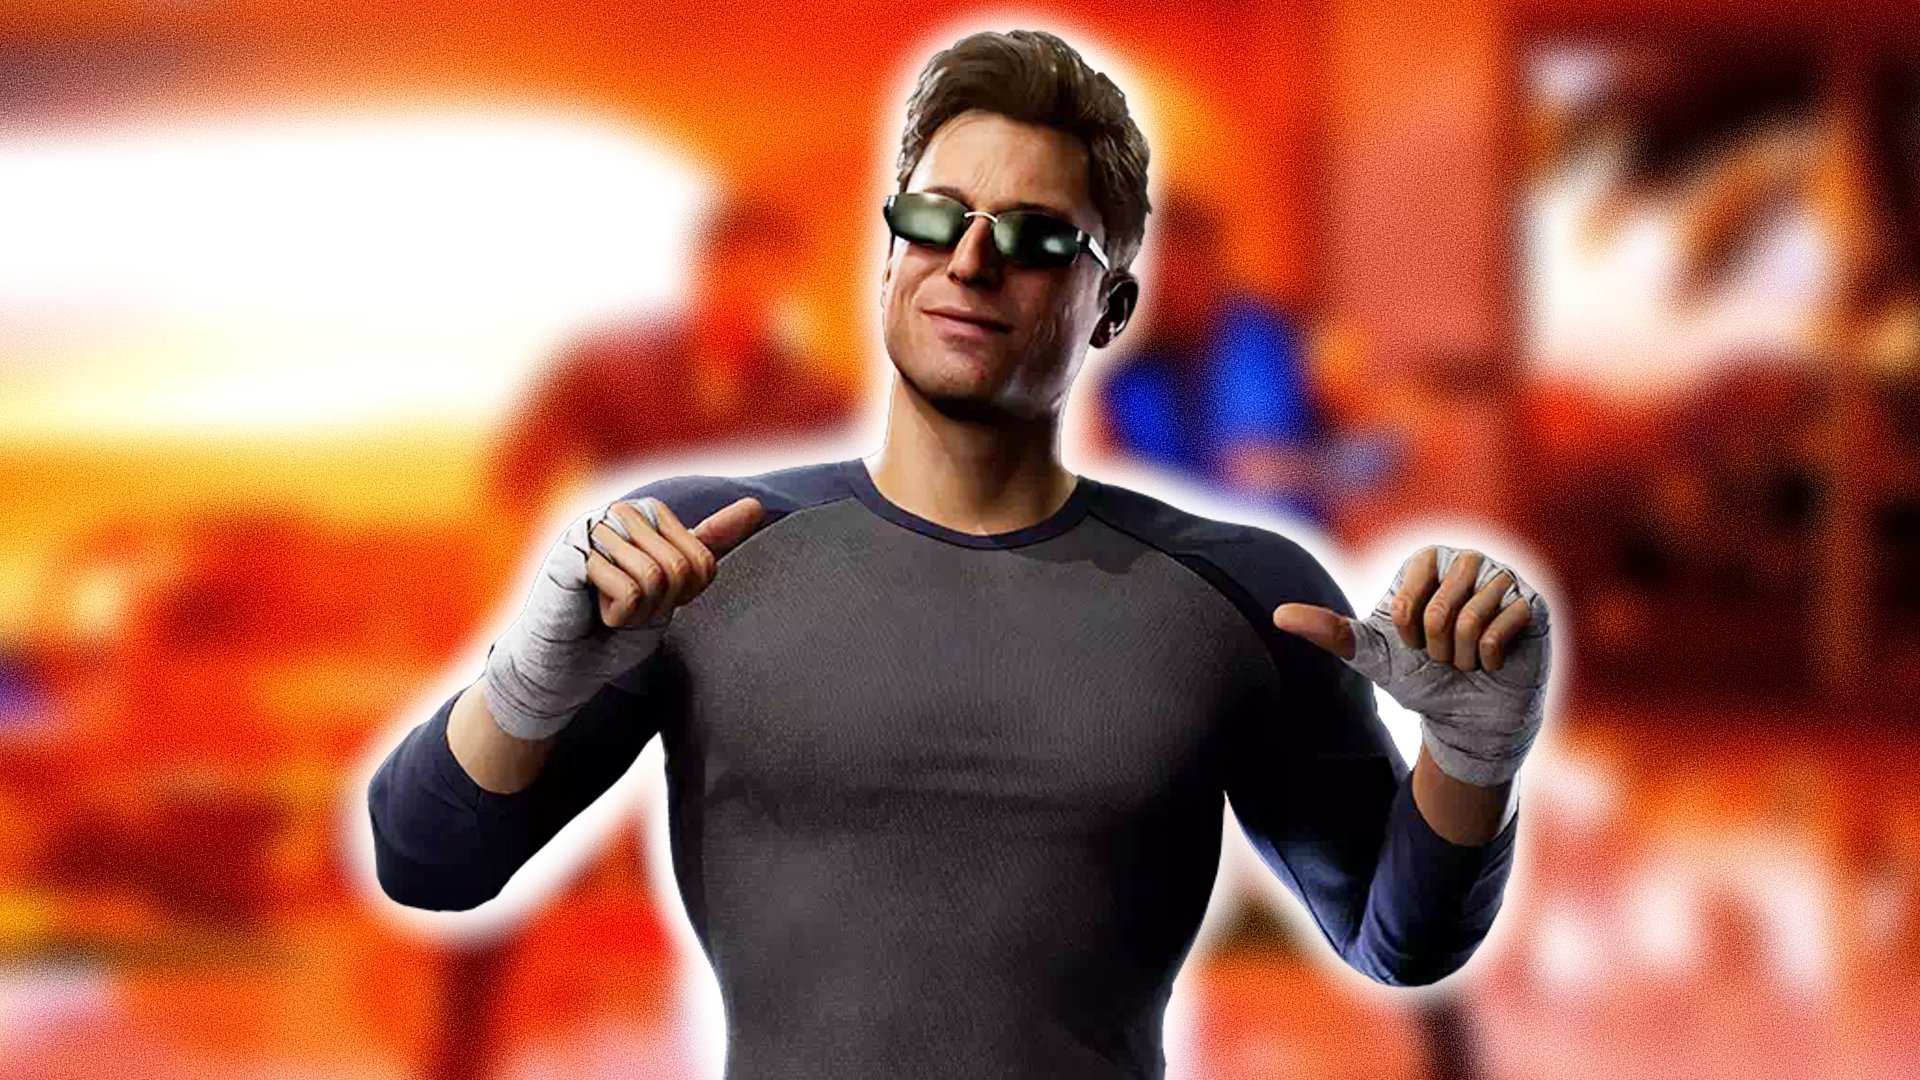 MK1 finally rewards being a show off, but only if you're Johnny Cage